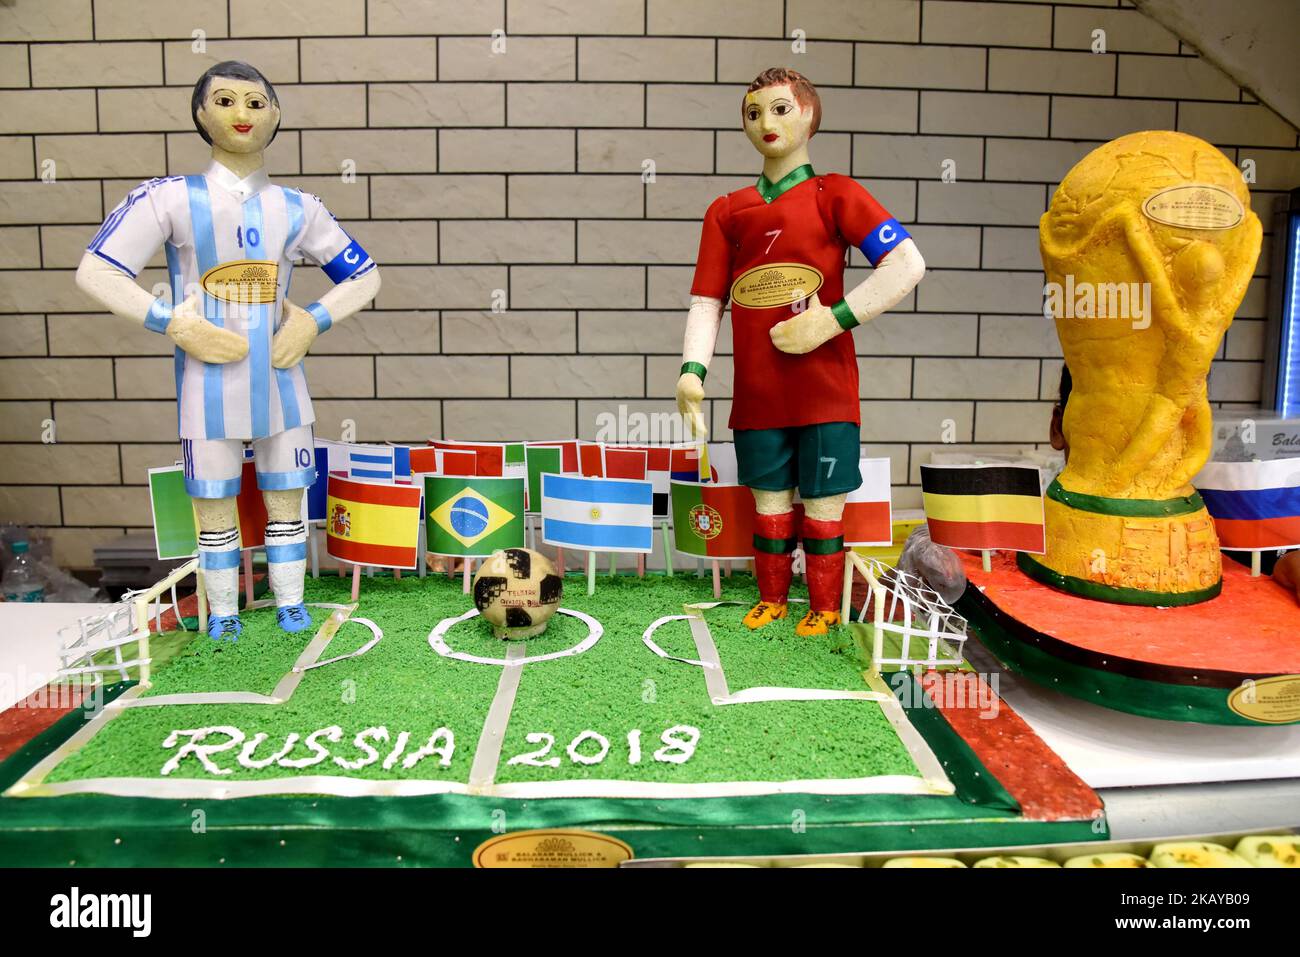 A Sweet shop arranges the display of the FIFA world cup trophy model ahead of the upcoming FIFA Russia 2018 World Cup, in Kolkata on June 13, 2018. (Photo by Debajyoti Chakraborty/NurPhoto) Stock Photo